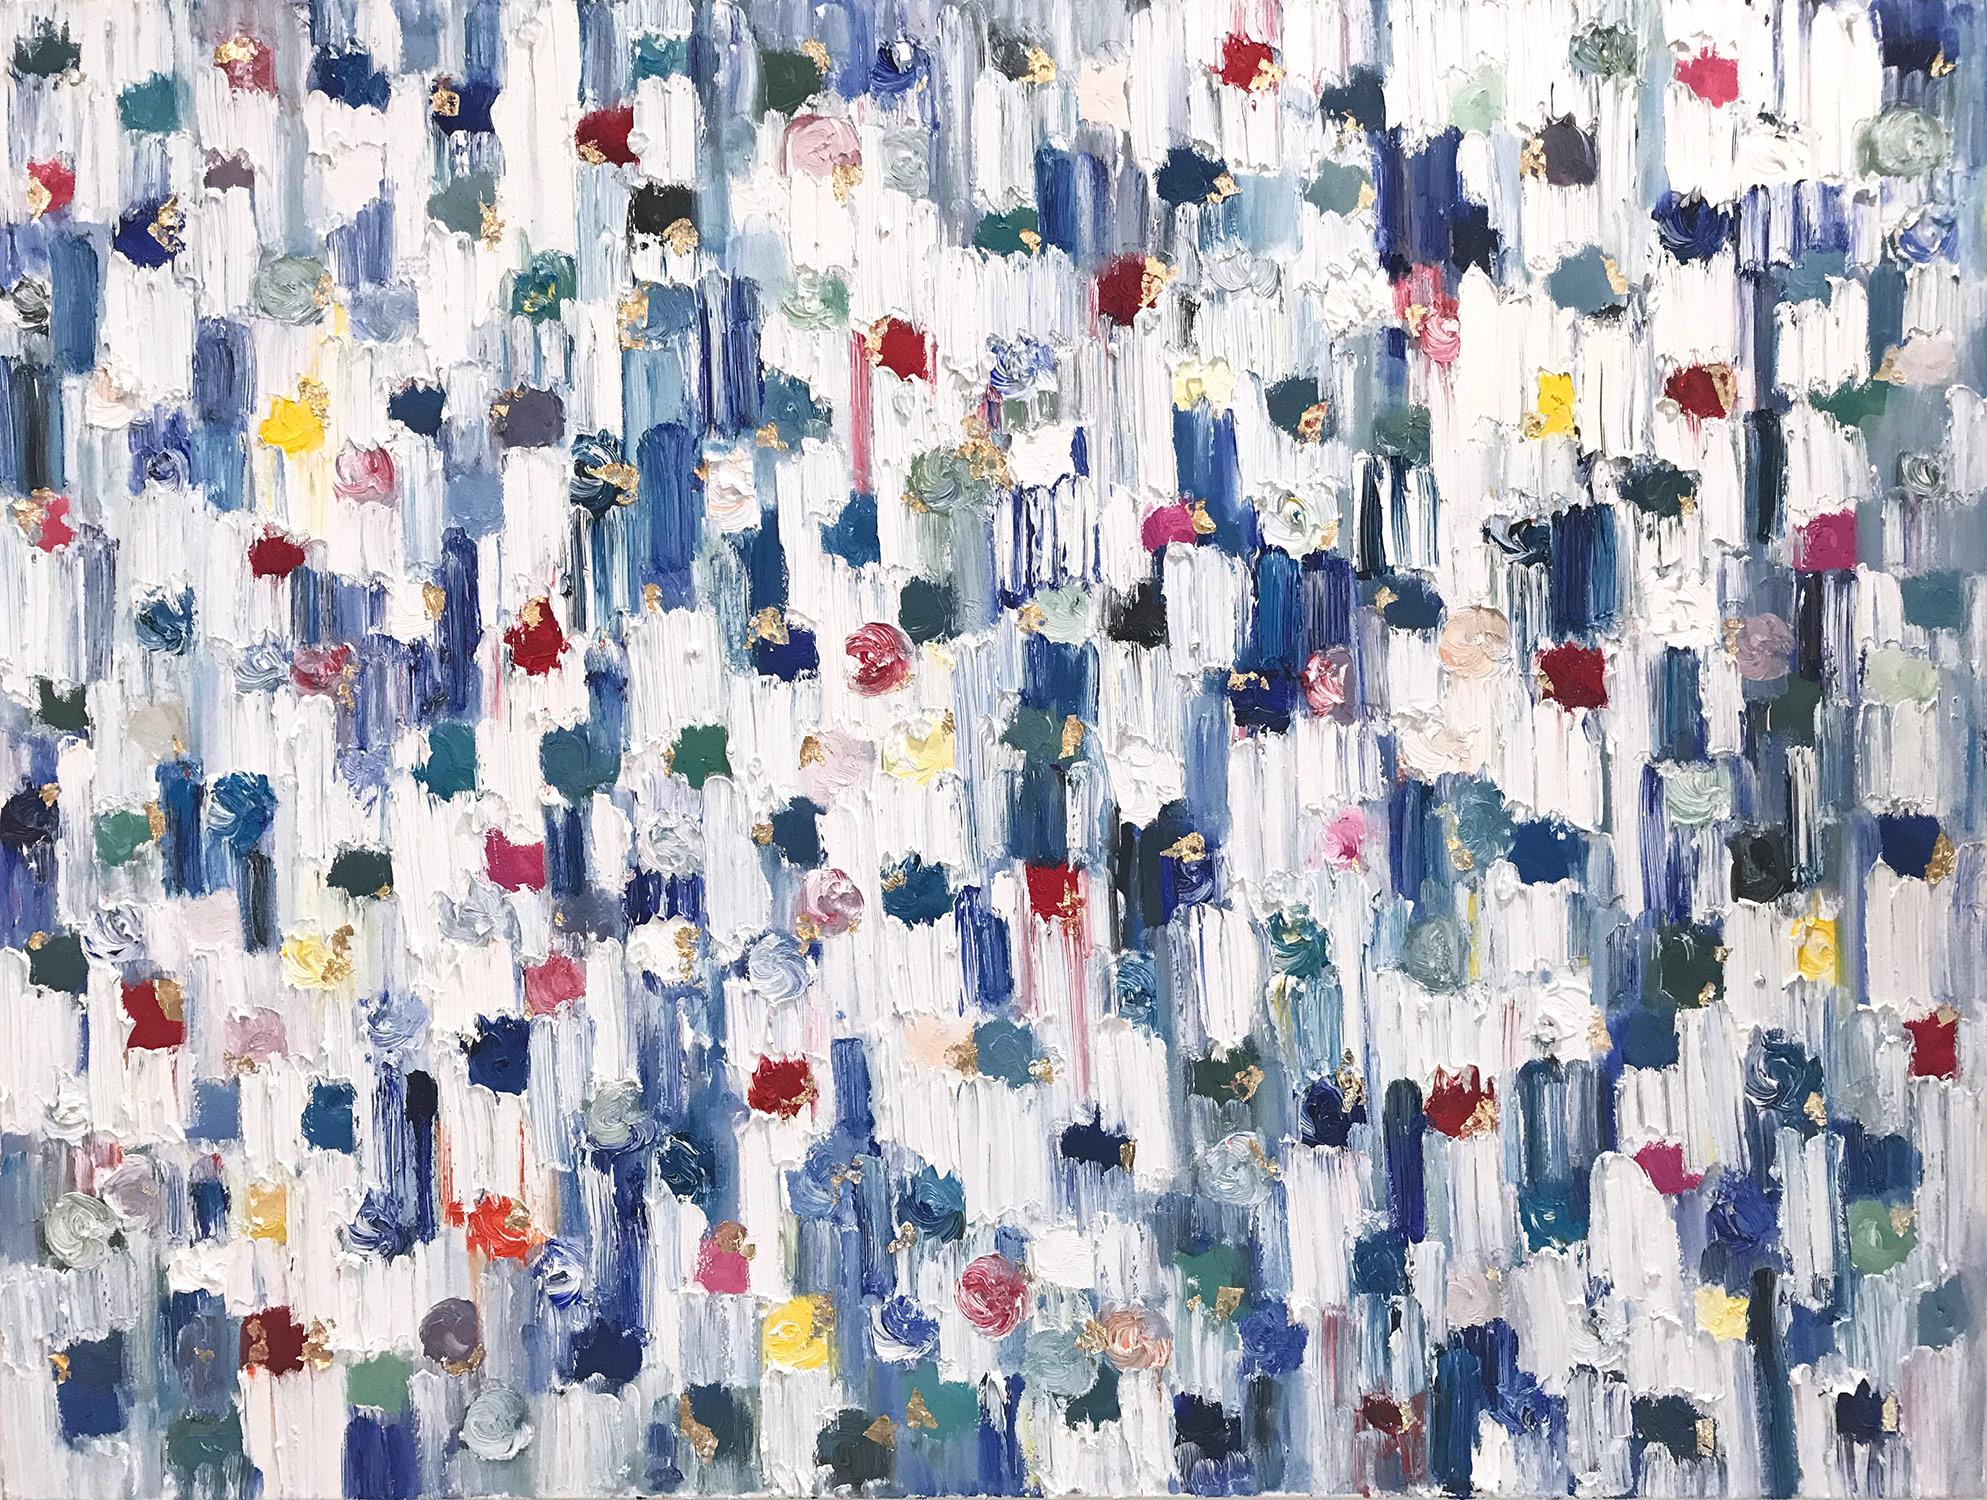 Cindy Shaoul Abstract Painting – "Dripping Dots - Cannes" Colorful Abstract Oil Painting on Canvas